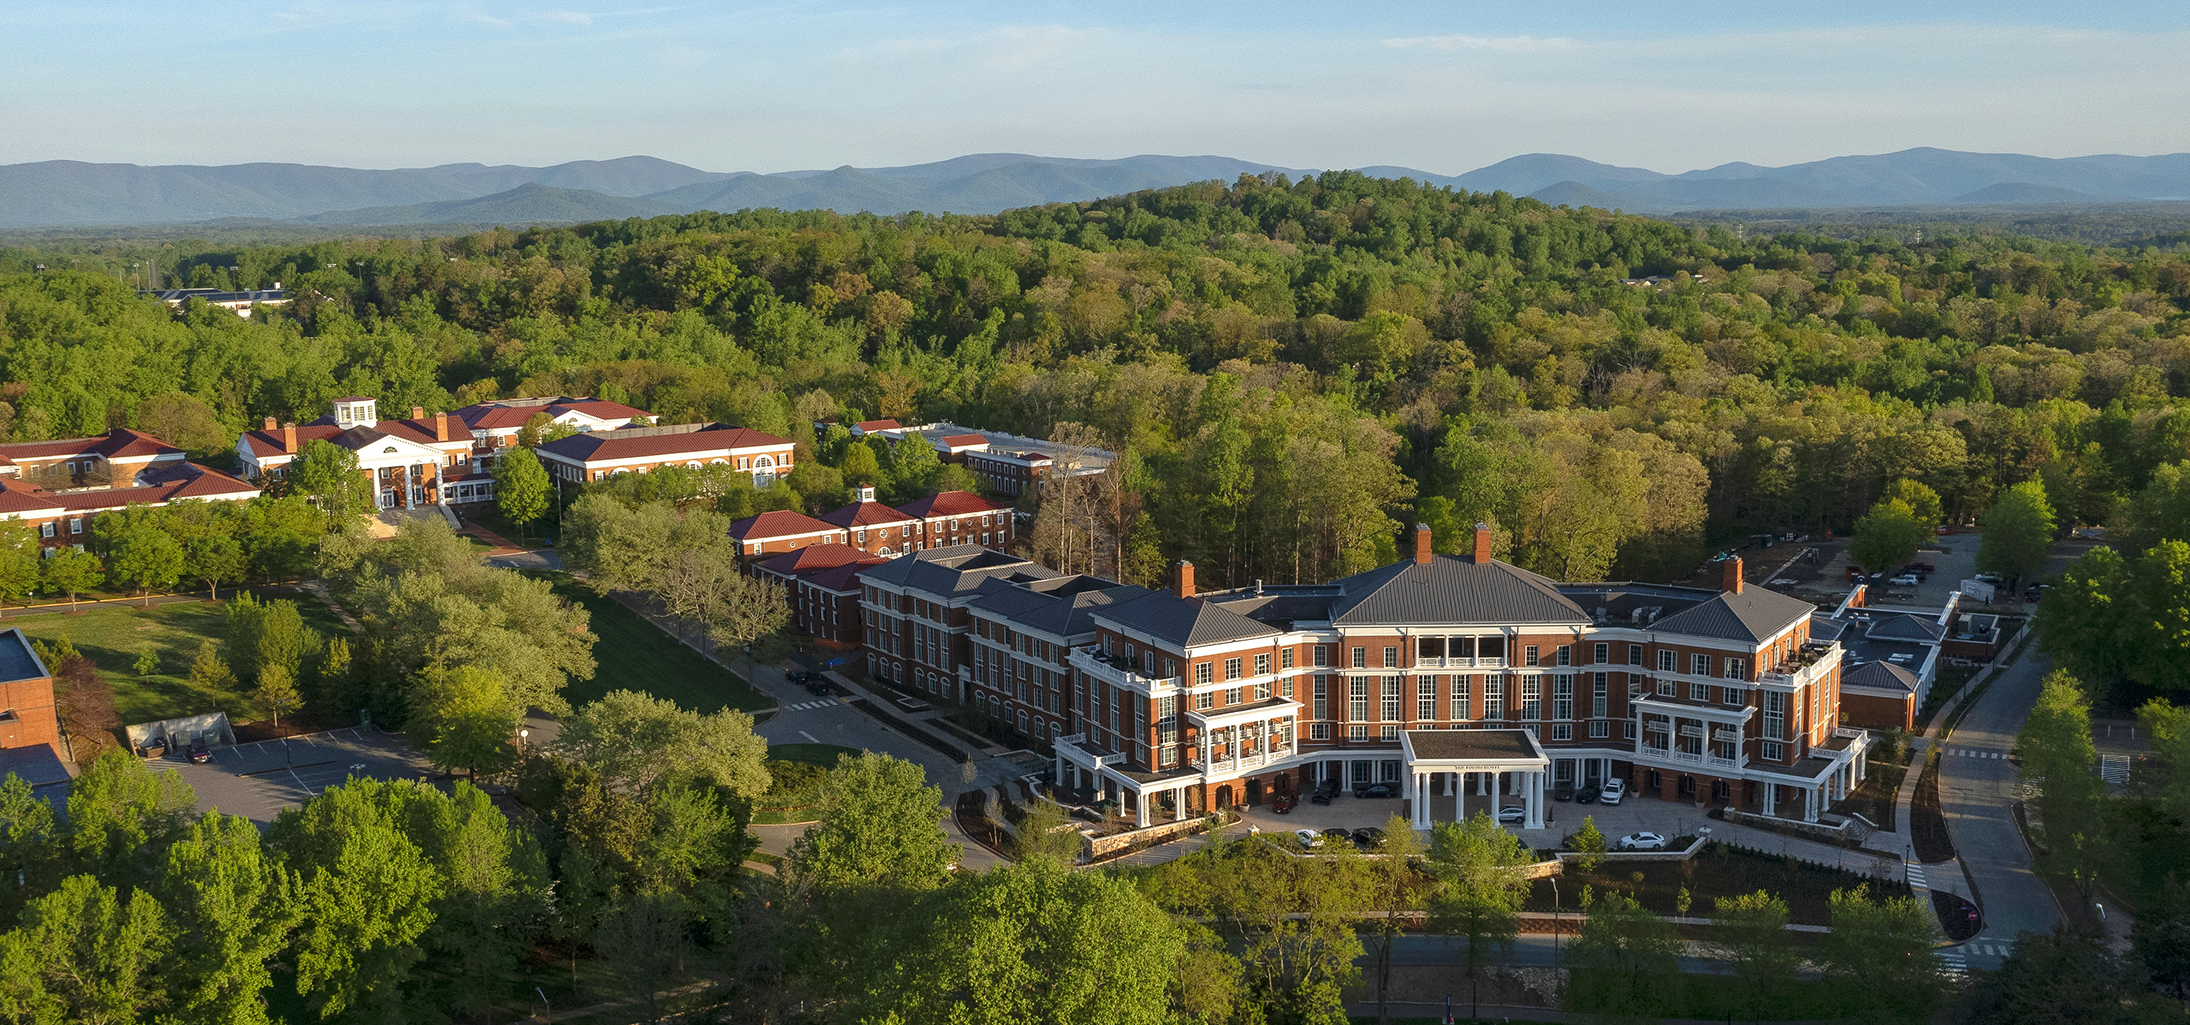 UVA Darden Grounds with The Forum Hotel